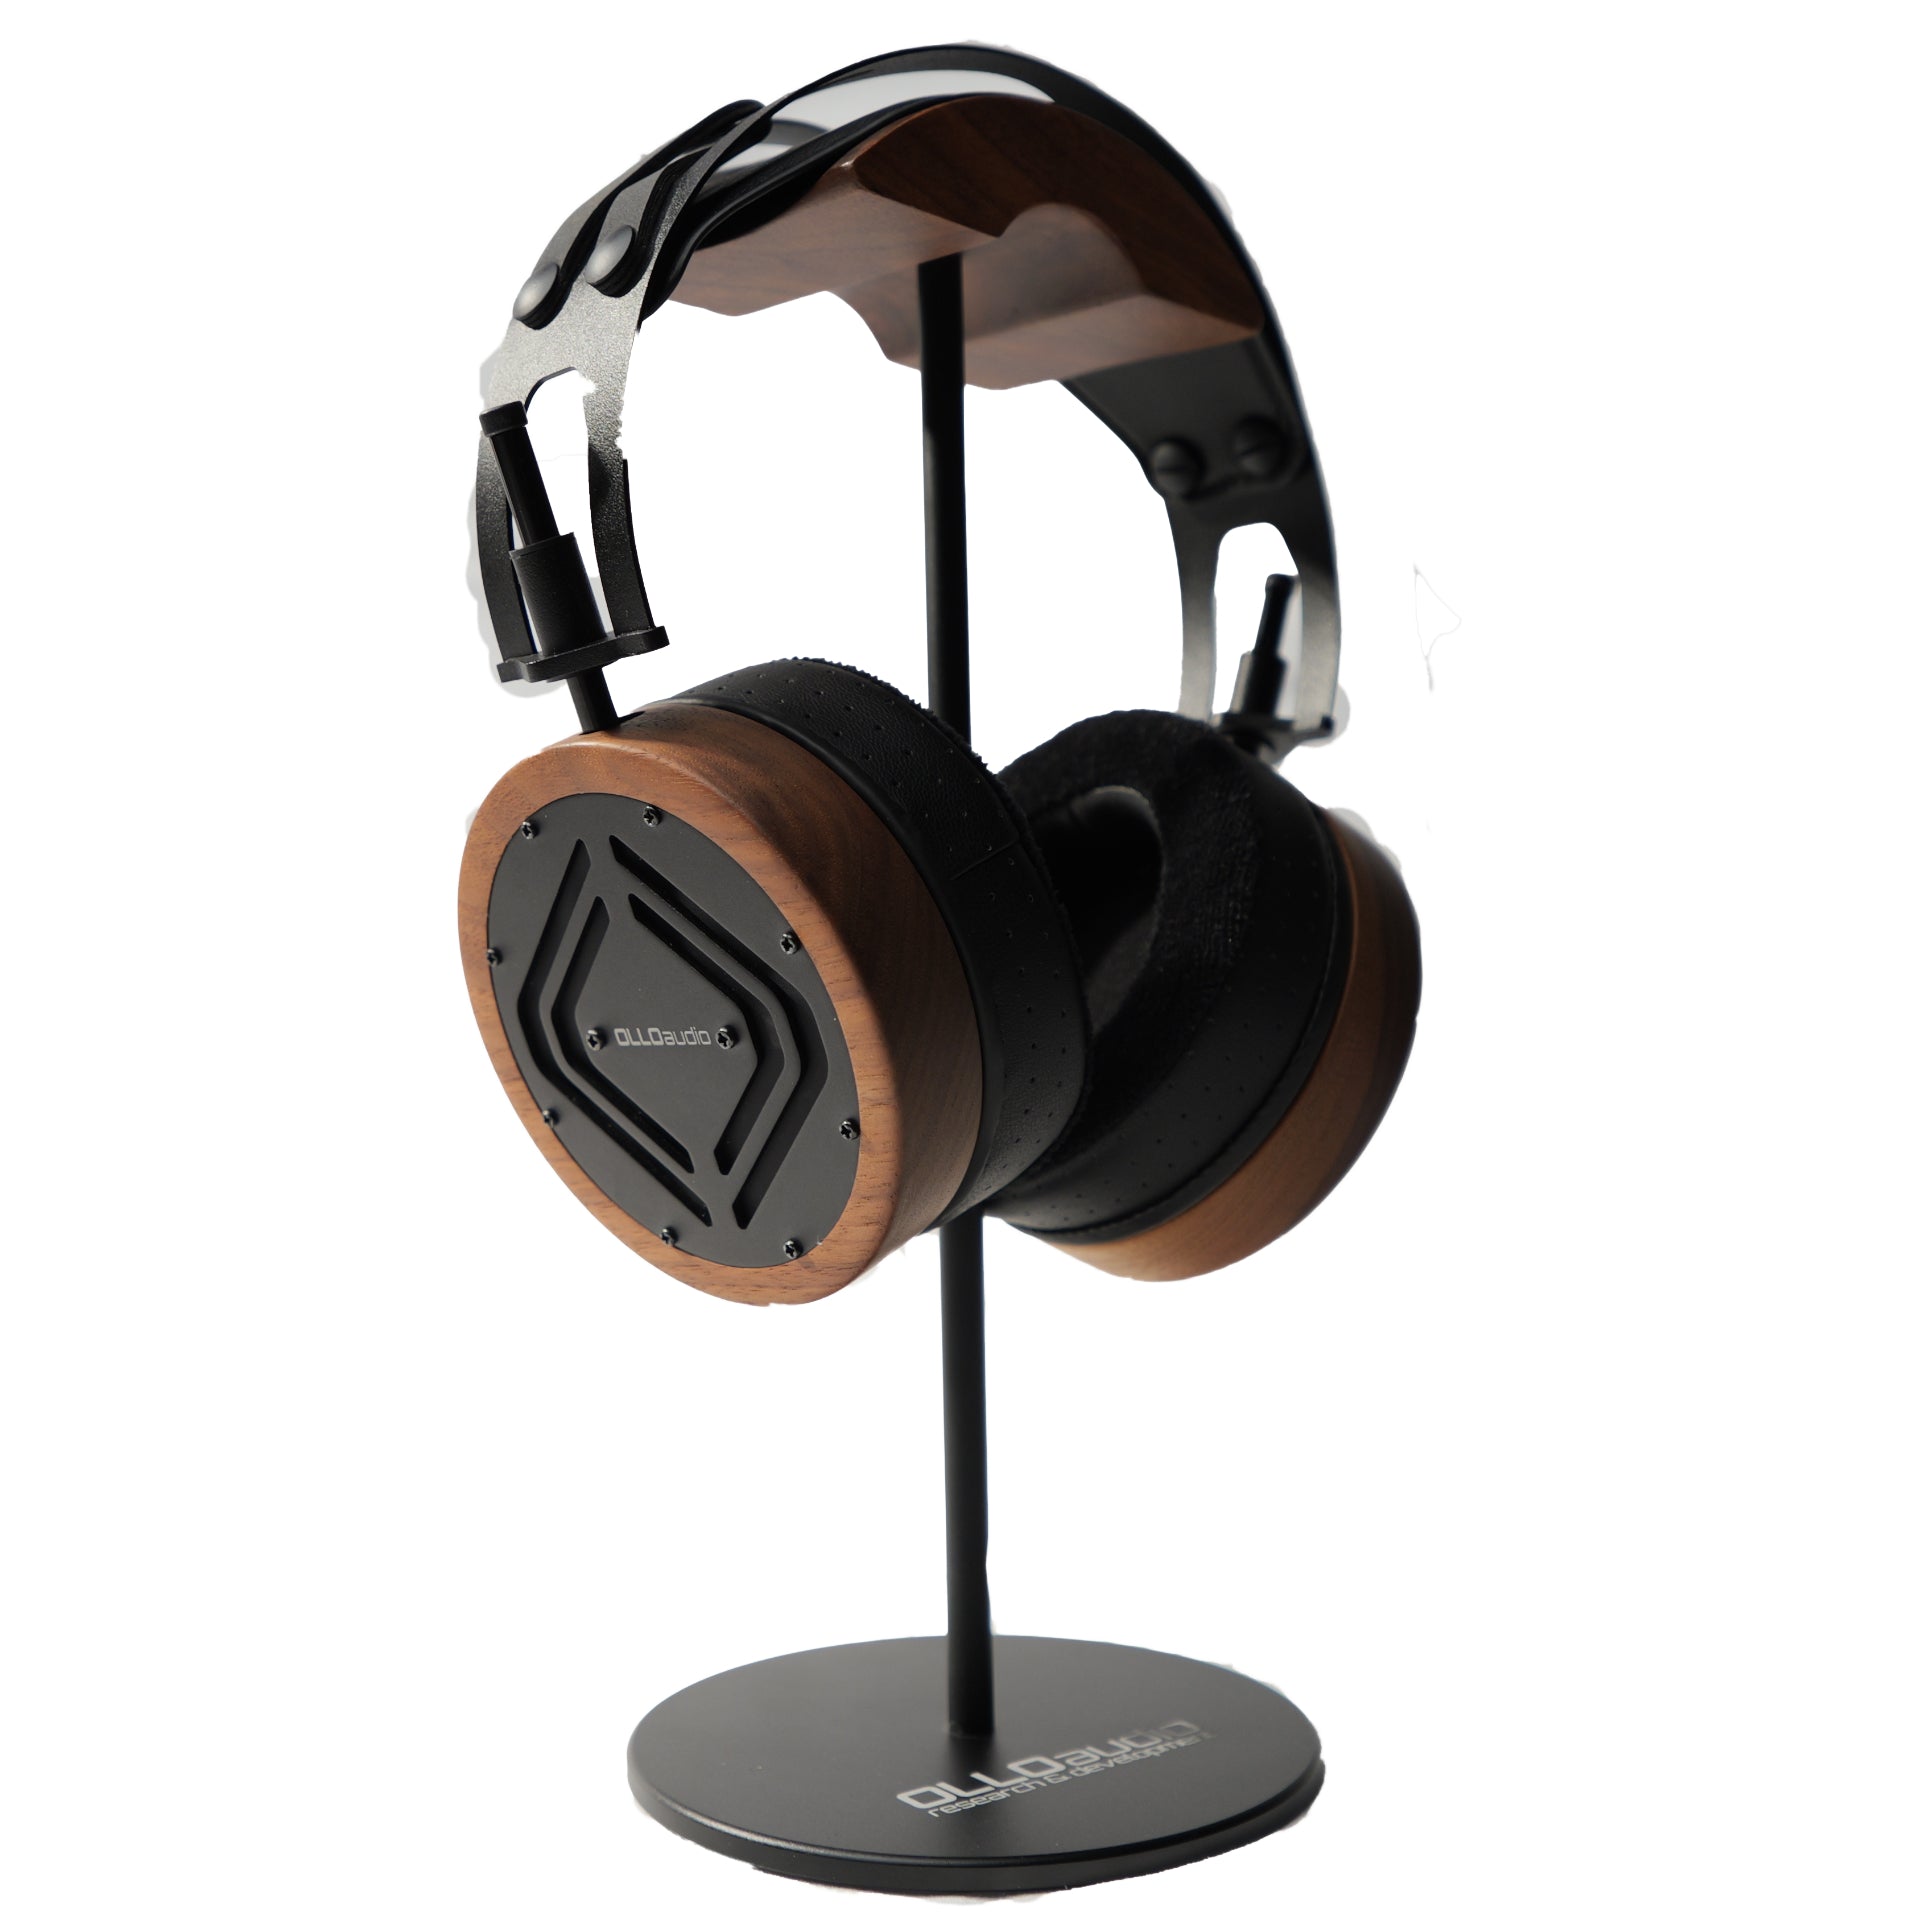 S5X headphones for mixing spatial audio e.g. Dolby Atmos or Sony 